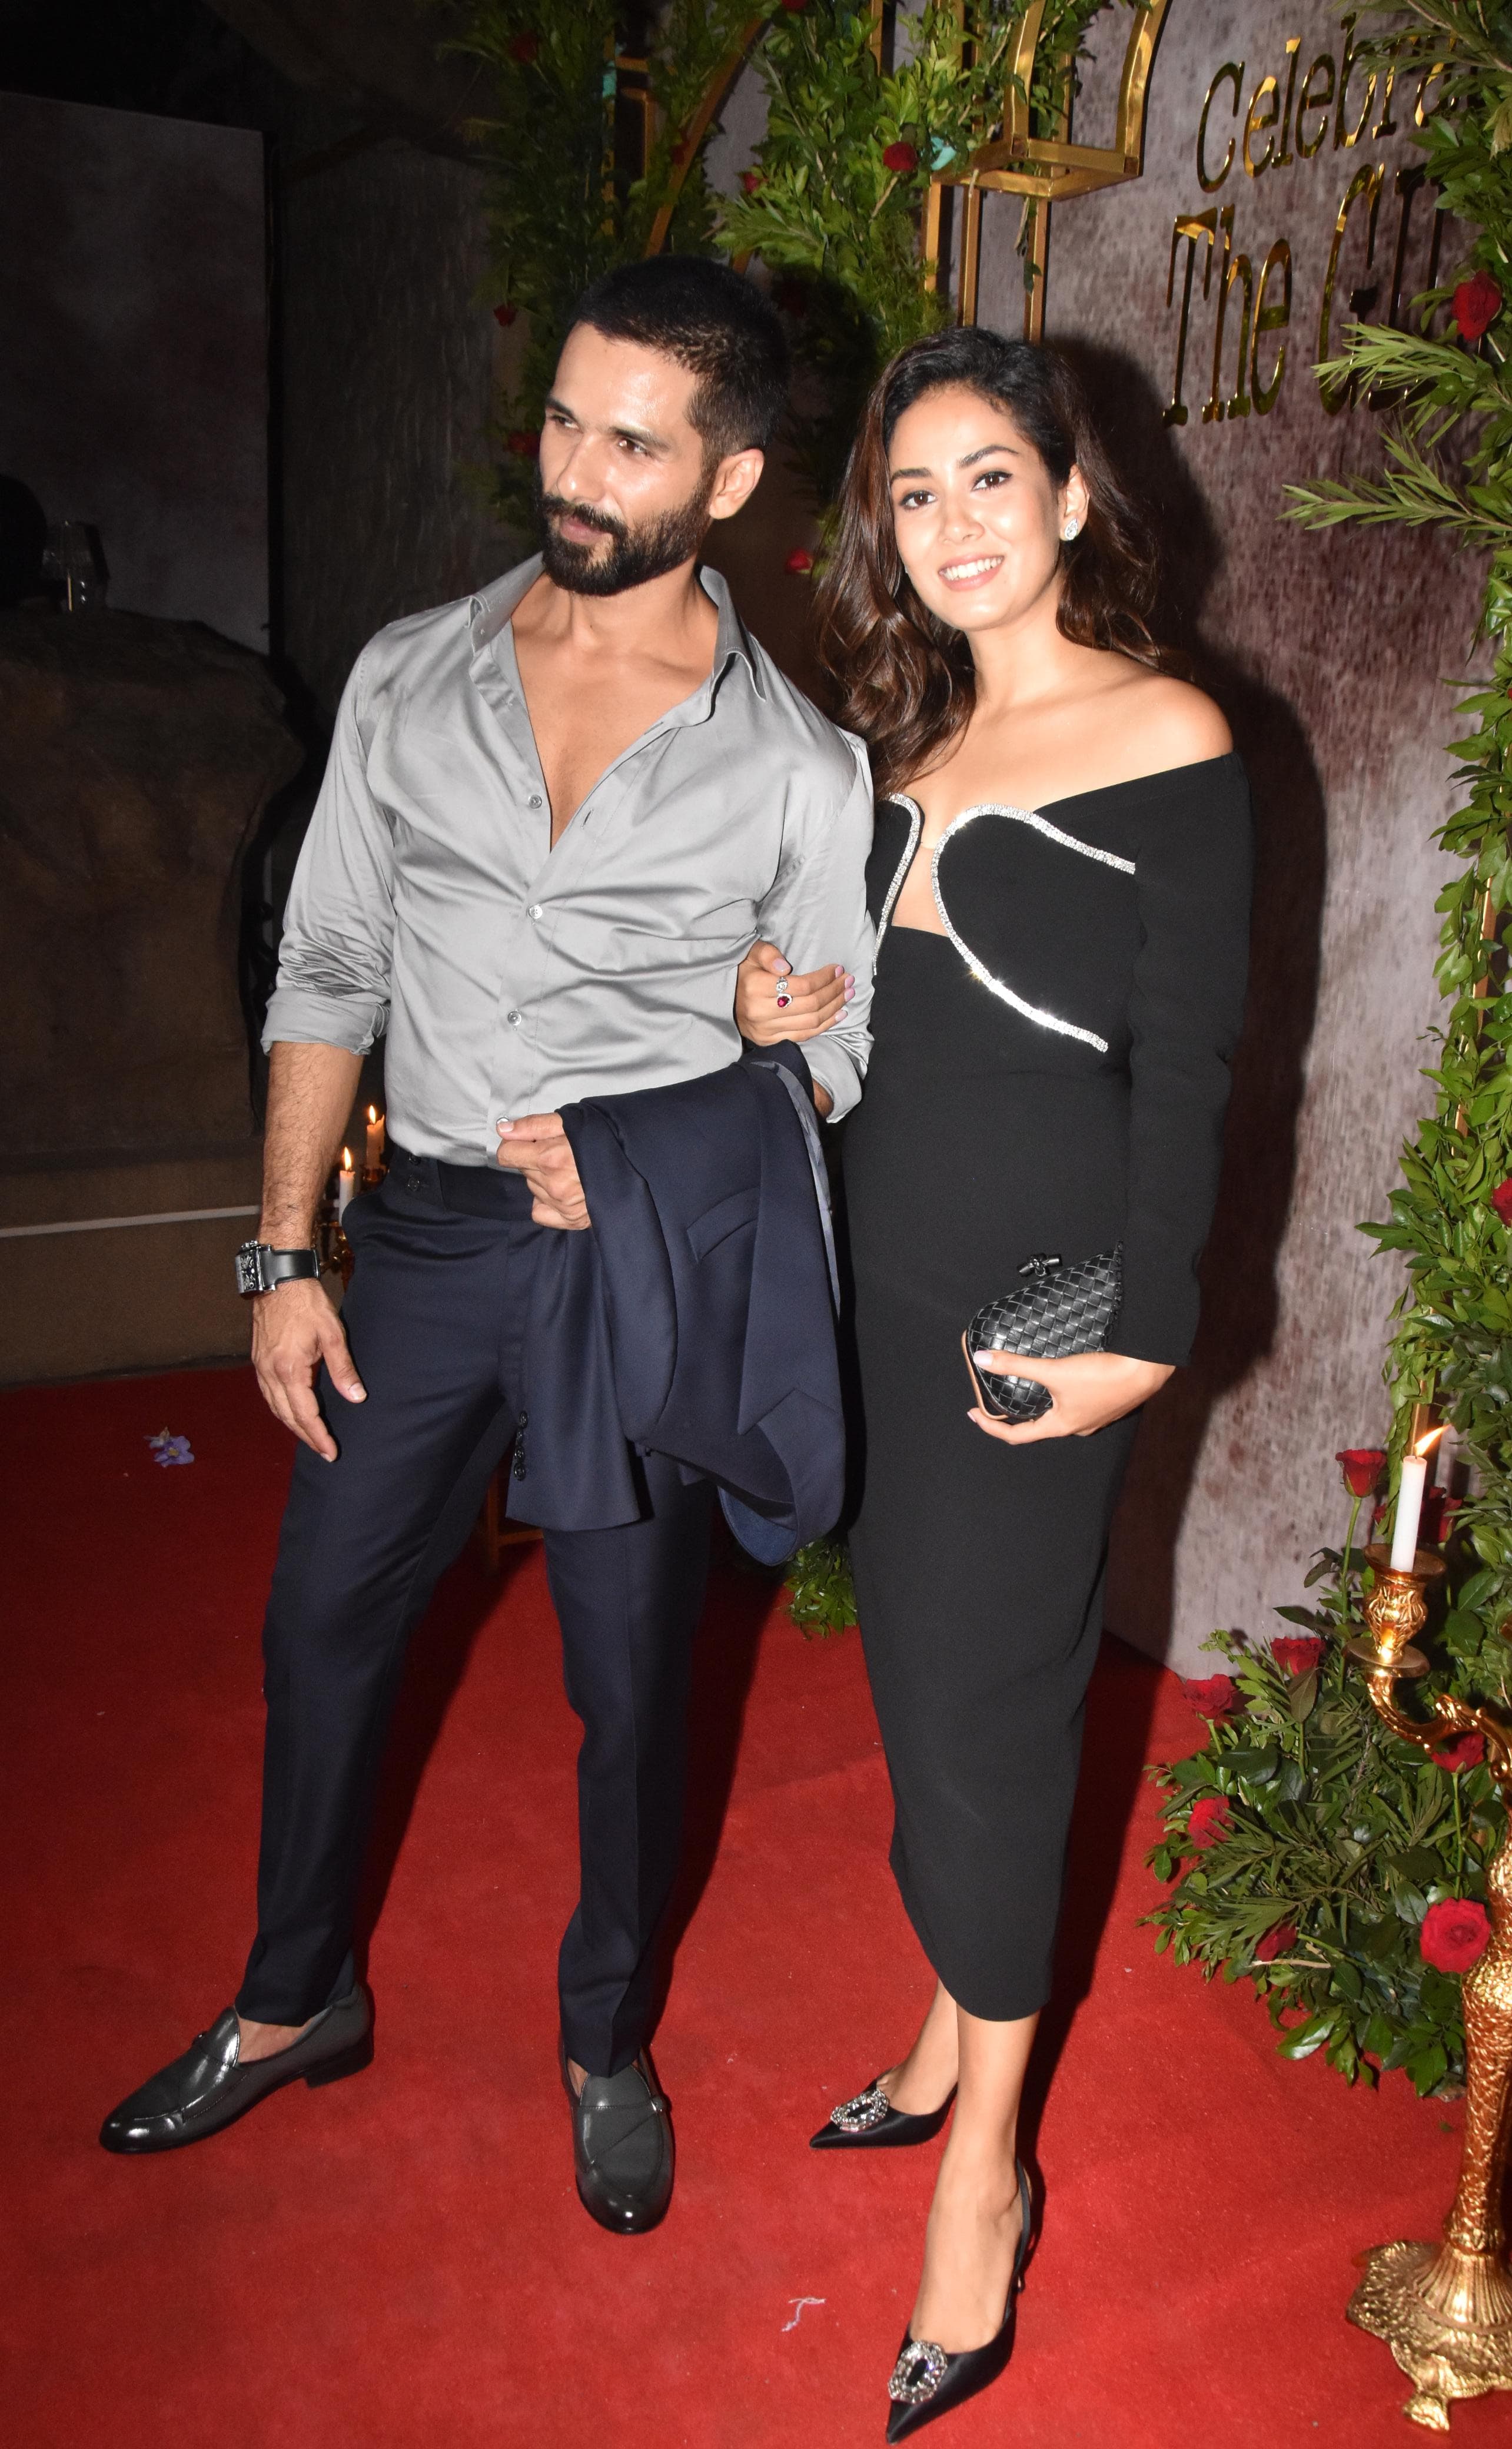 Shahid Kapoor and Mira Rajput looked dapper as they were clicked together